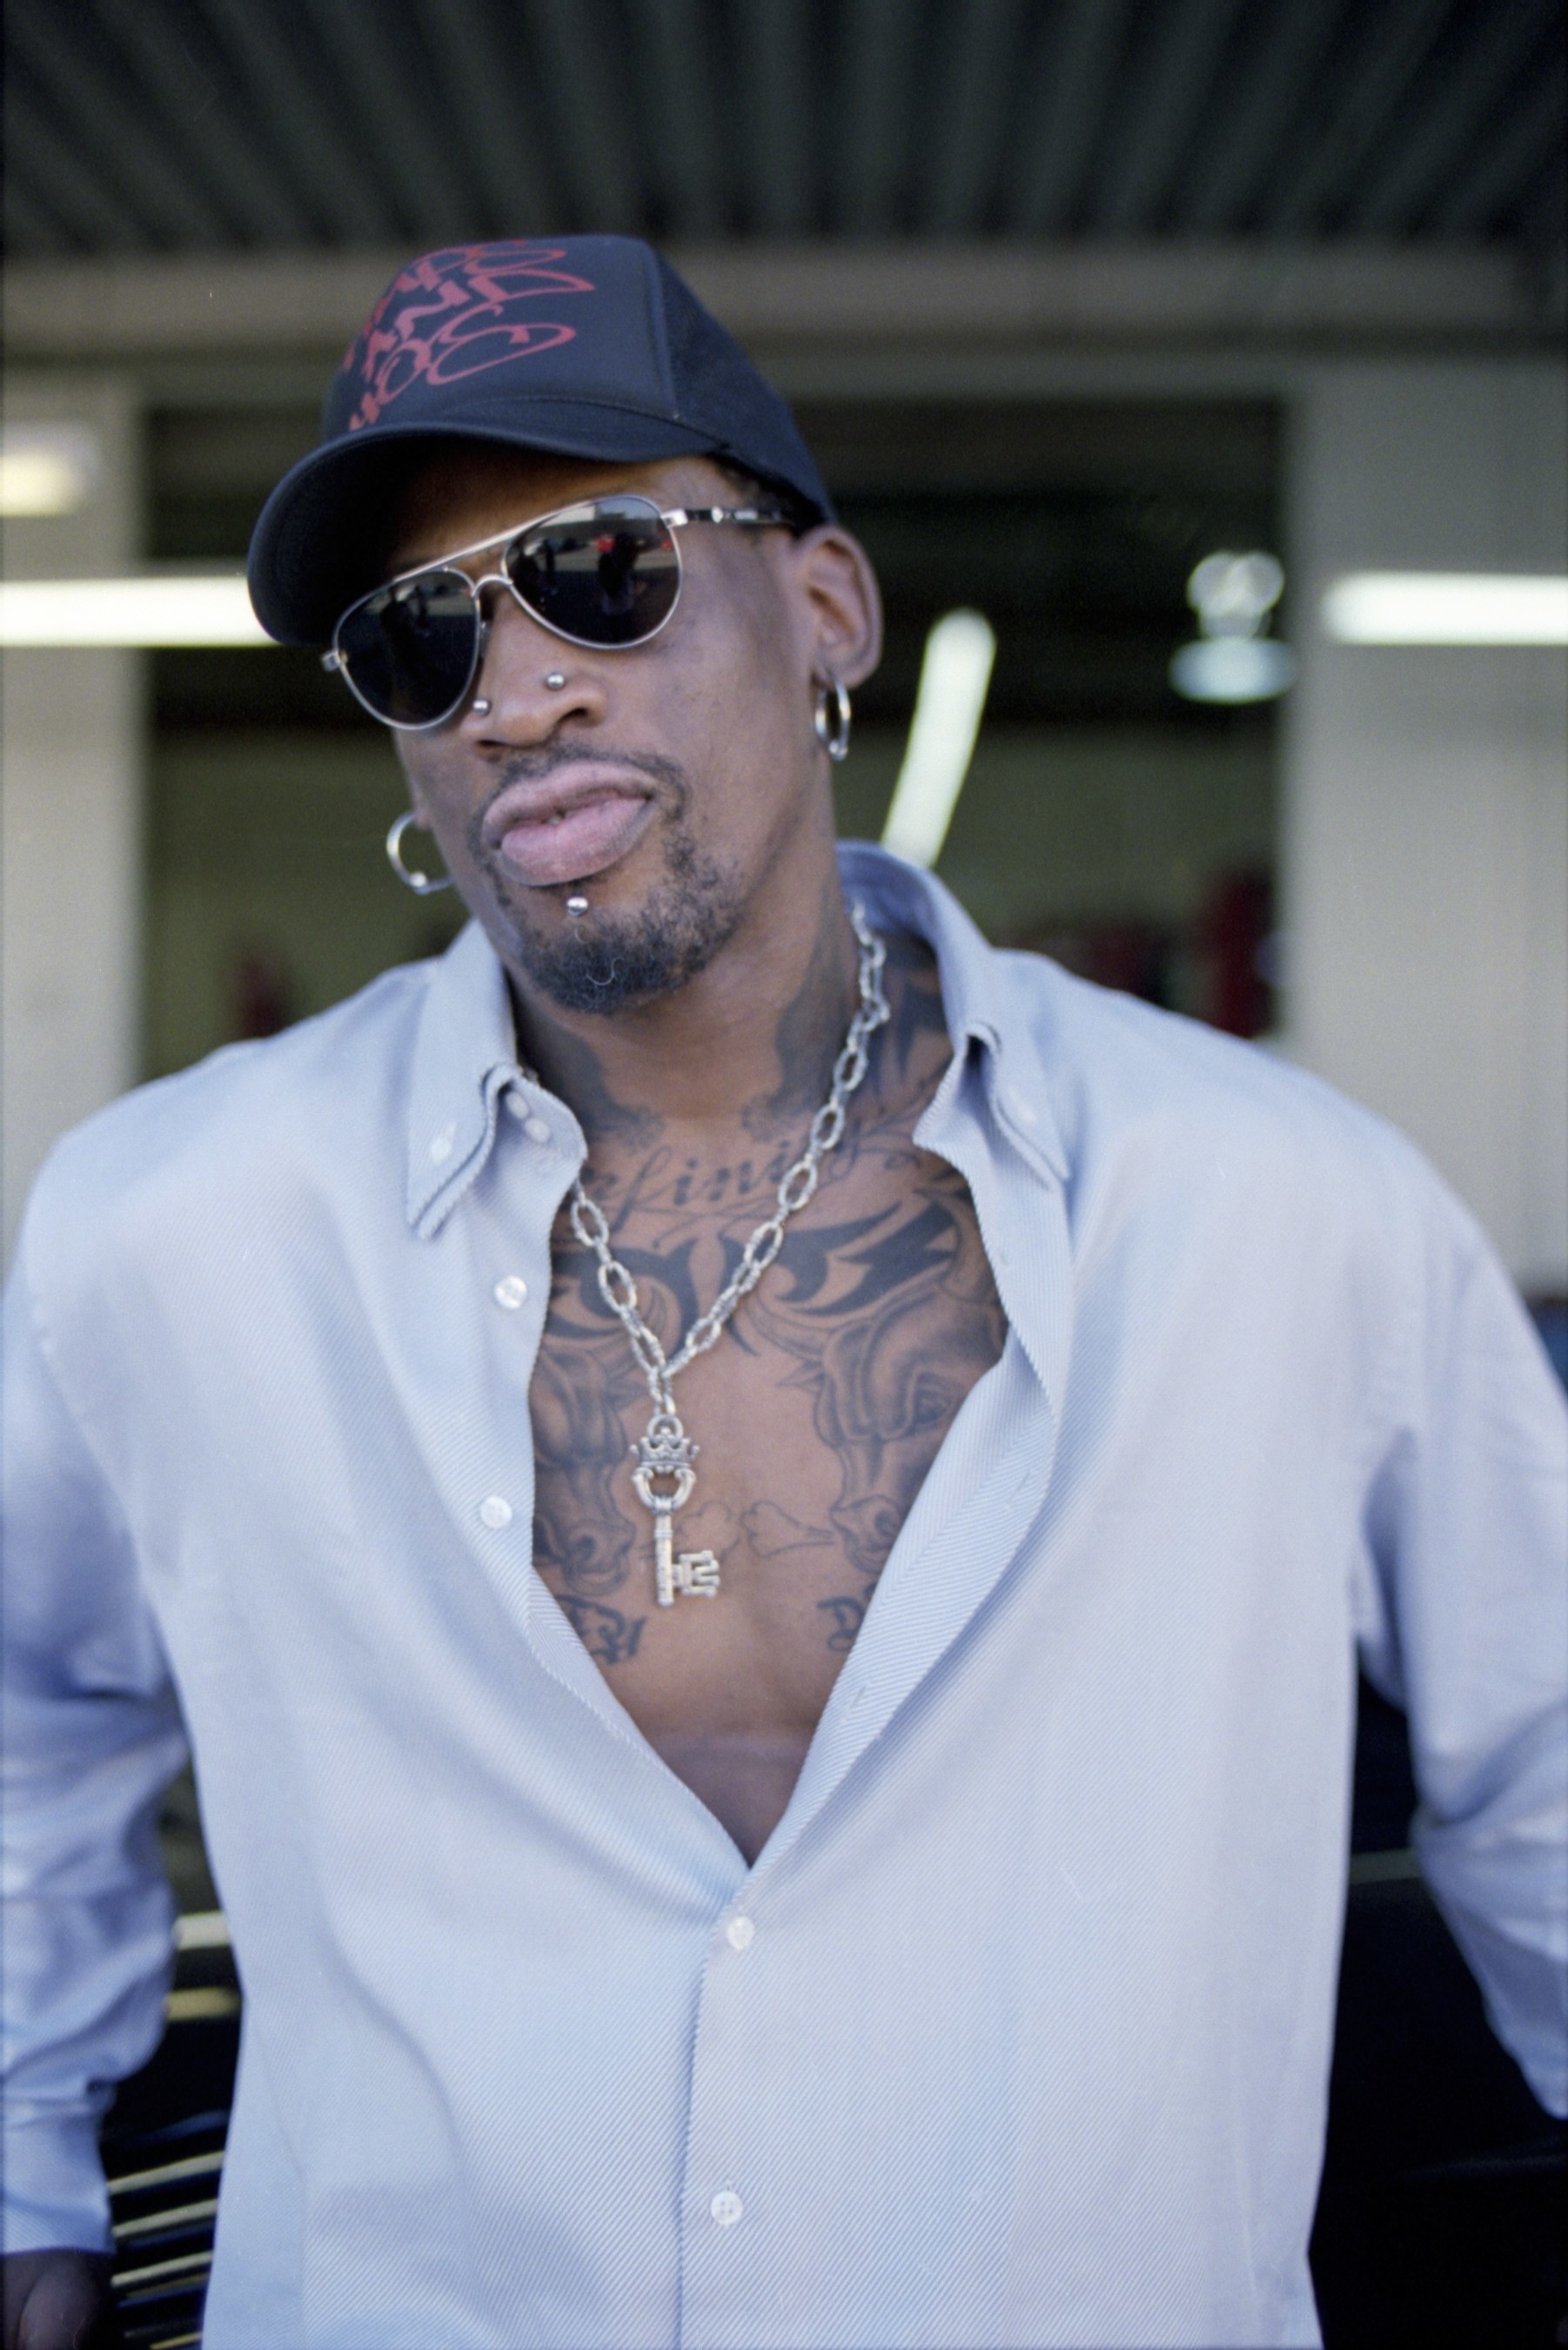 Dennis Rodman wears a hat and an unbuttoned blue shirt that shows off his chest tattoos